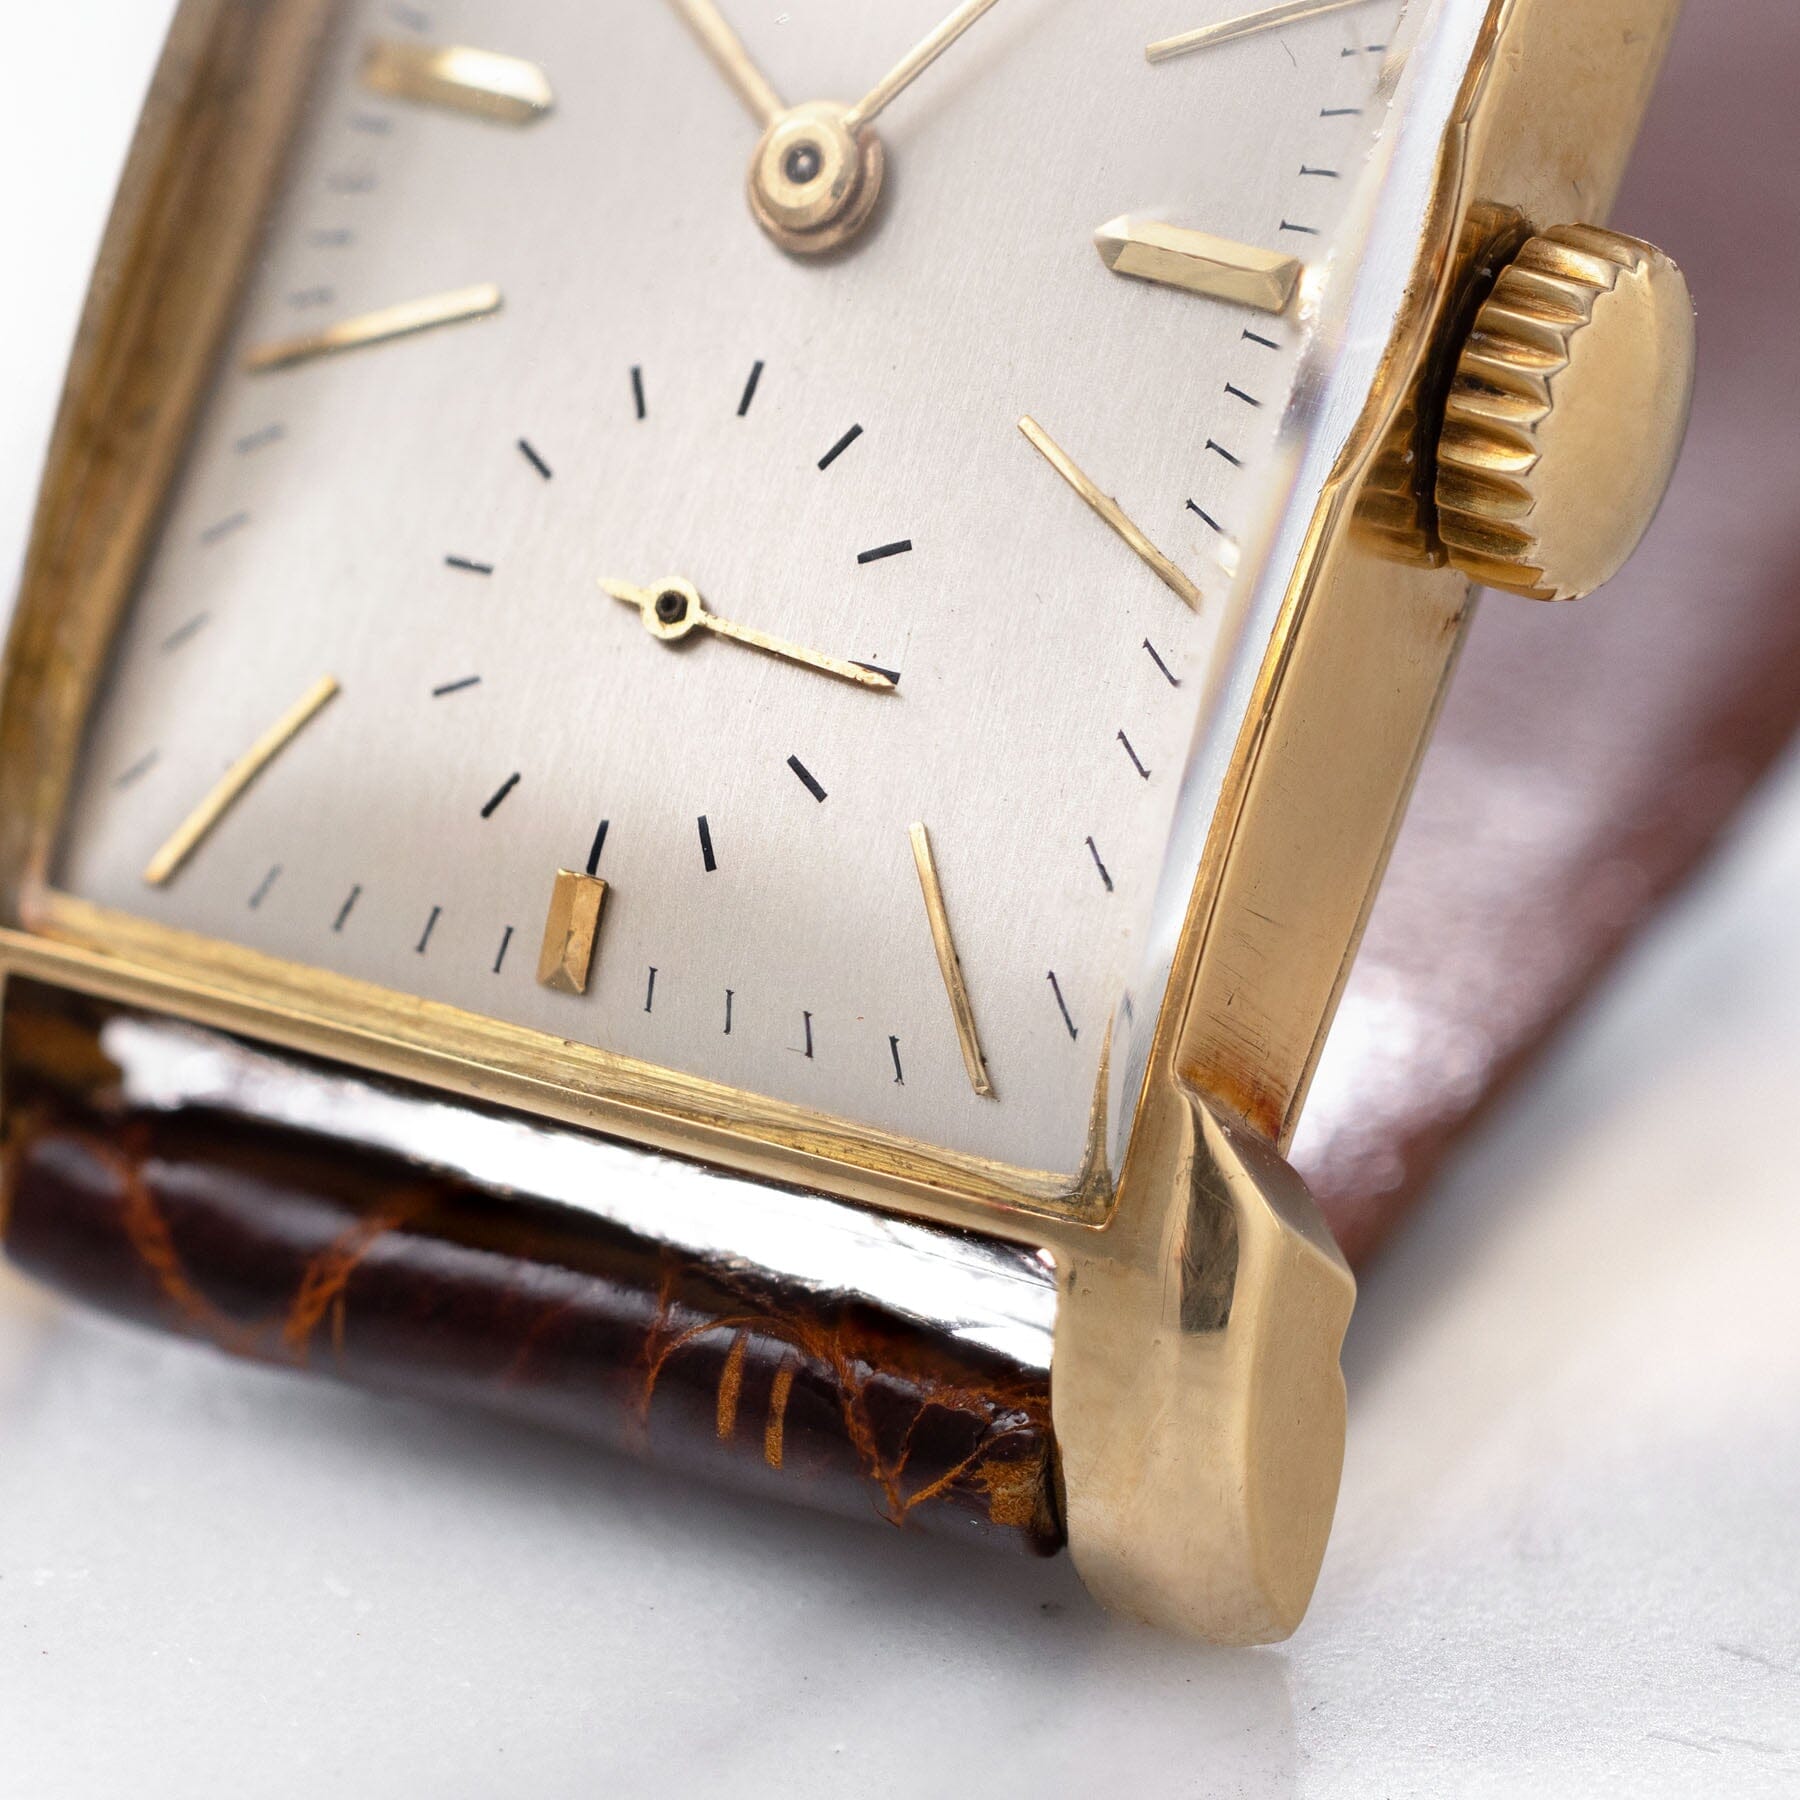 Patek Philippe 18 k gold Rectangular Dresswatch "Bunny Lugs" with Extract From The Archives ref 2403